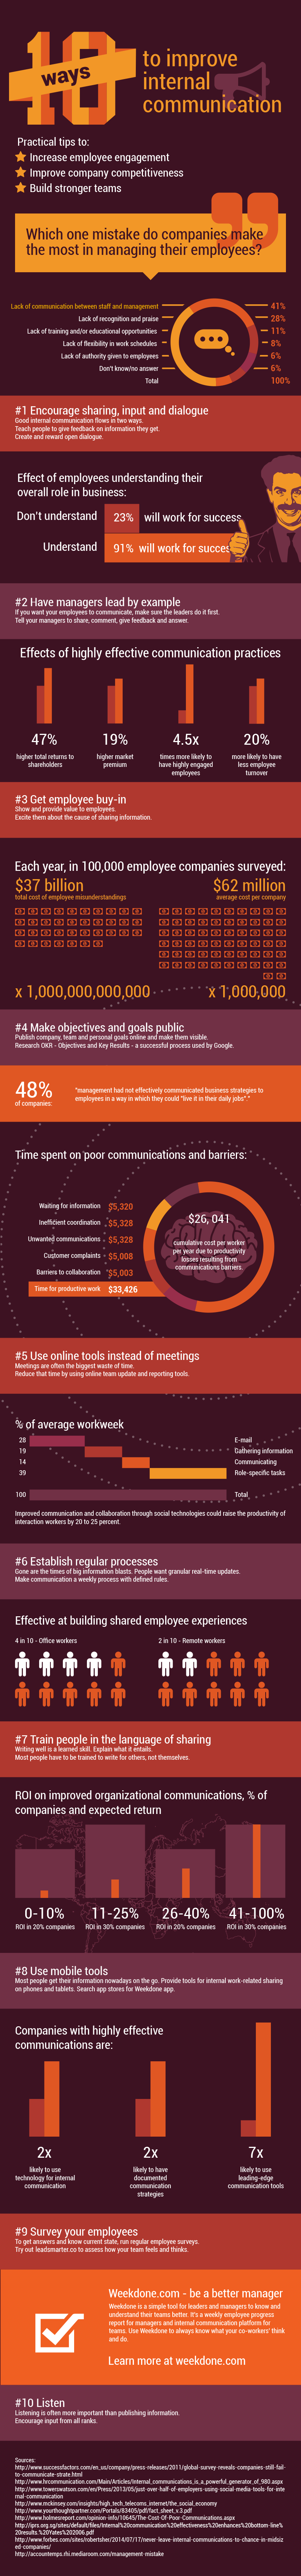 10_ways_to_improve_internal_communication-infographic-tips